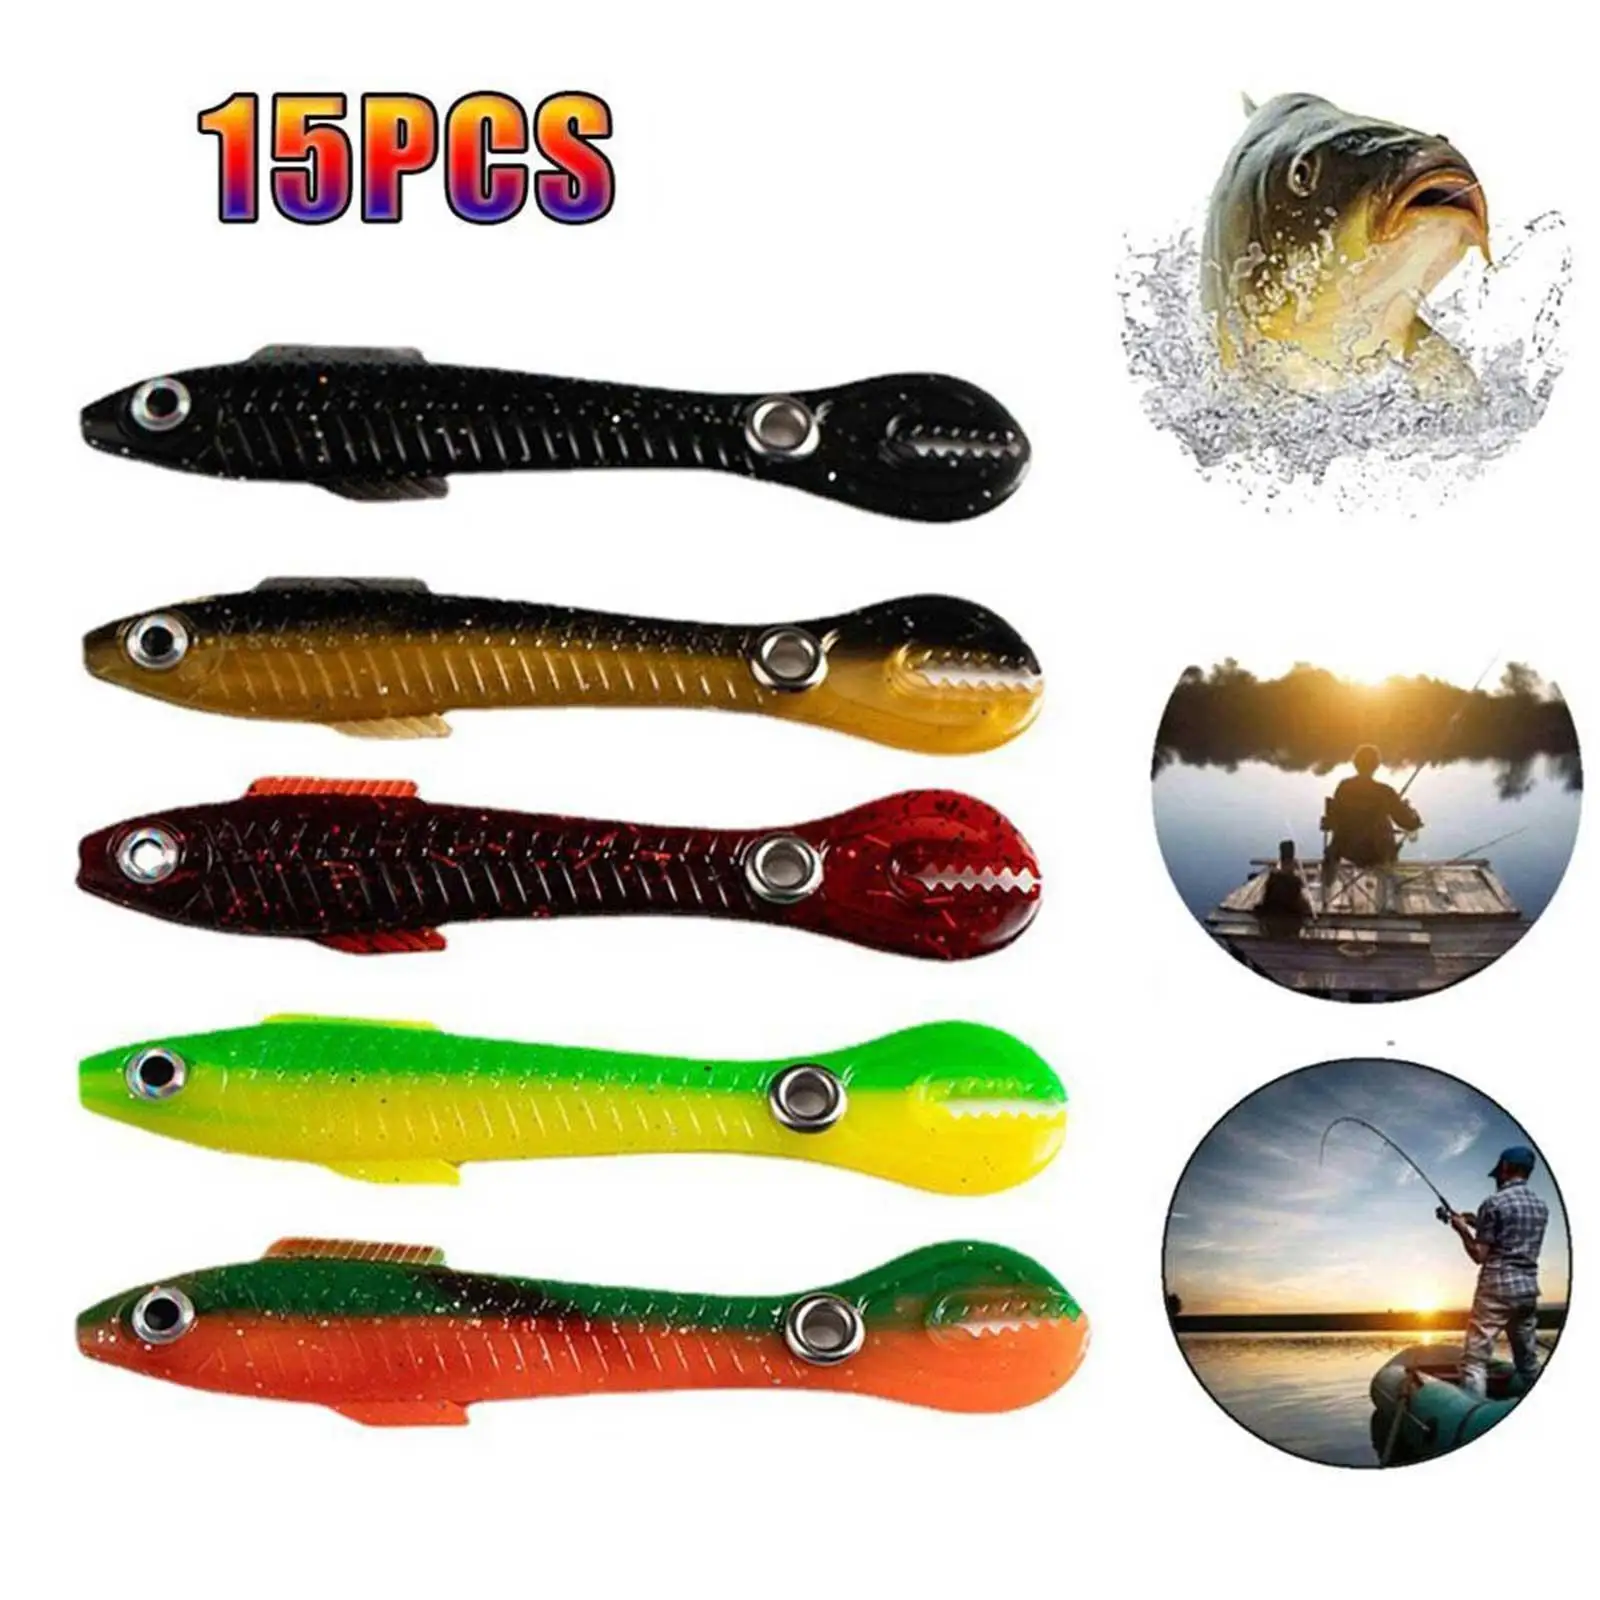 

6g 10cm 15pcs Loach Baits Bass Pike Trout Soft Fishing Bait Bouncing Lure Simulation Bionic Silicone Tail Wobbler Lures